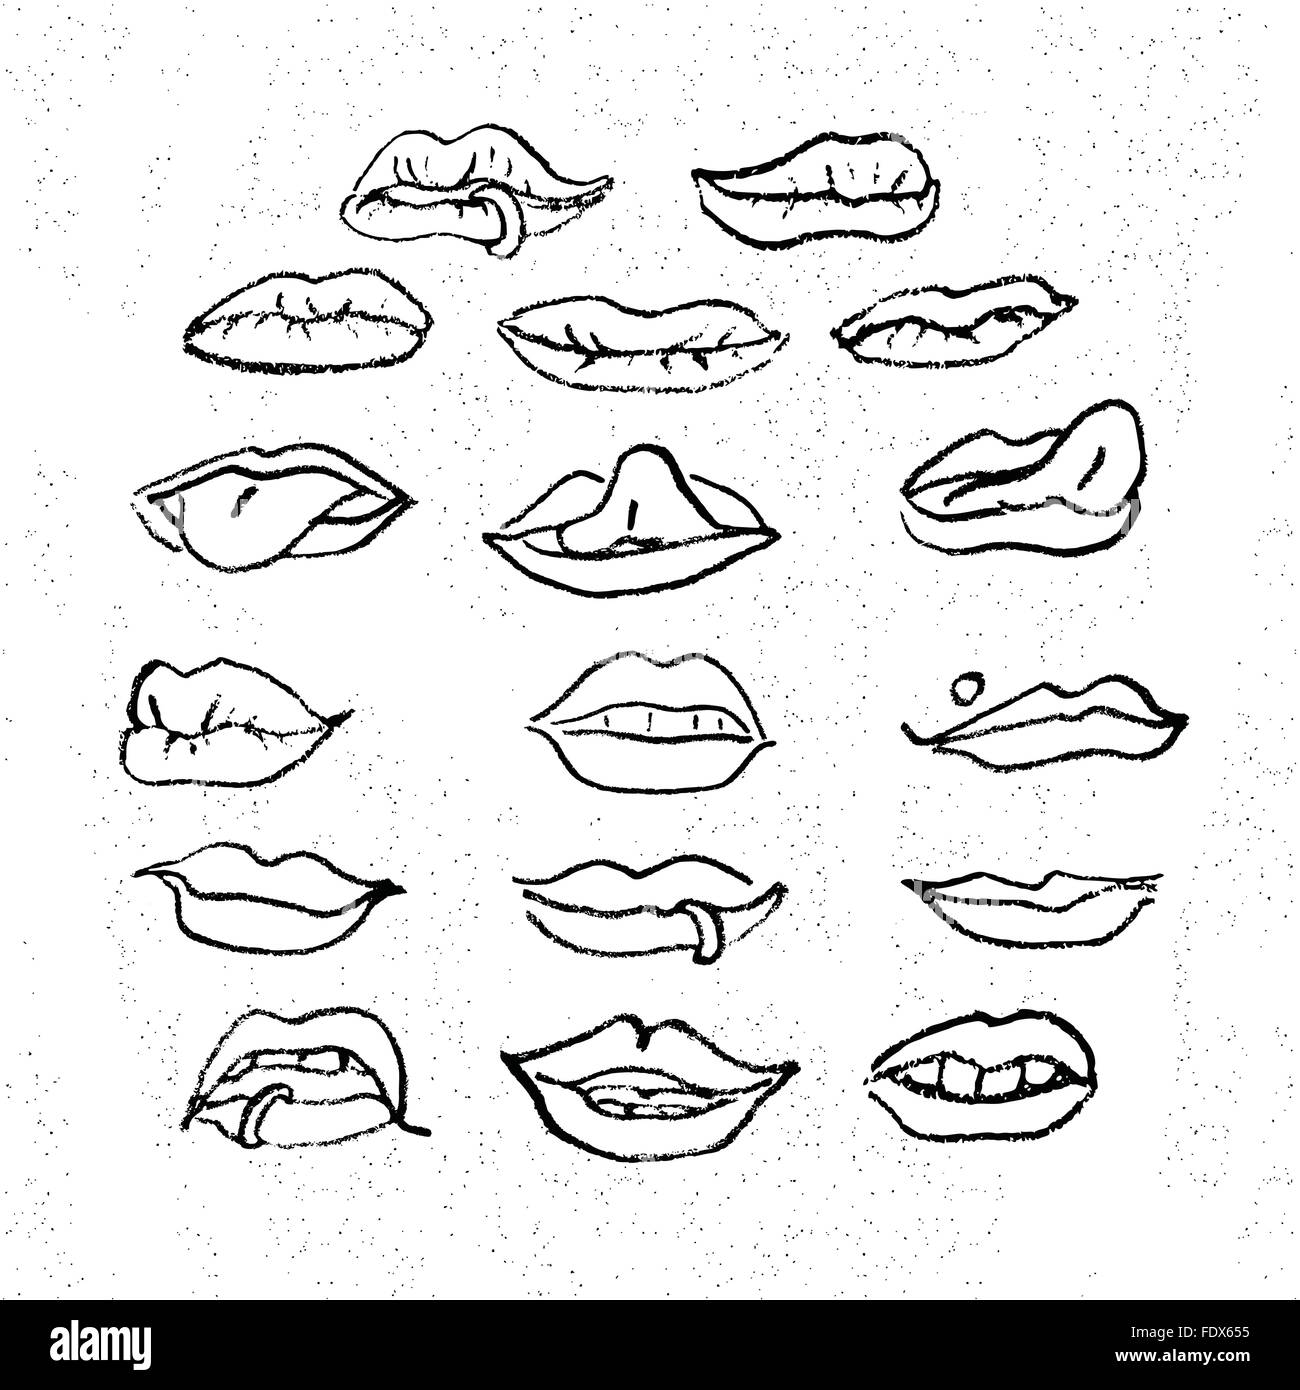 Lips set, attractive human mouths. Cartoon mouth icons. Every mouth represents a different style and emotion. Stock Vector